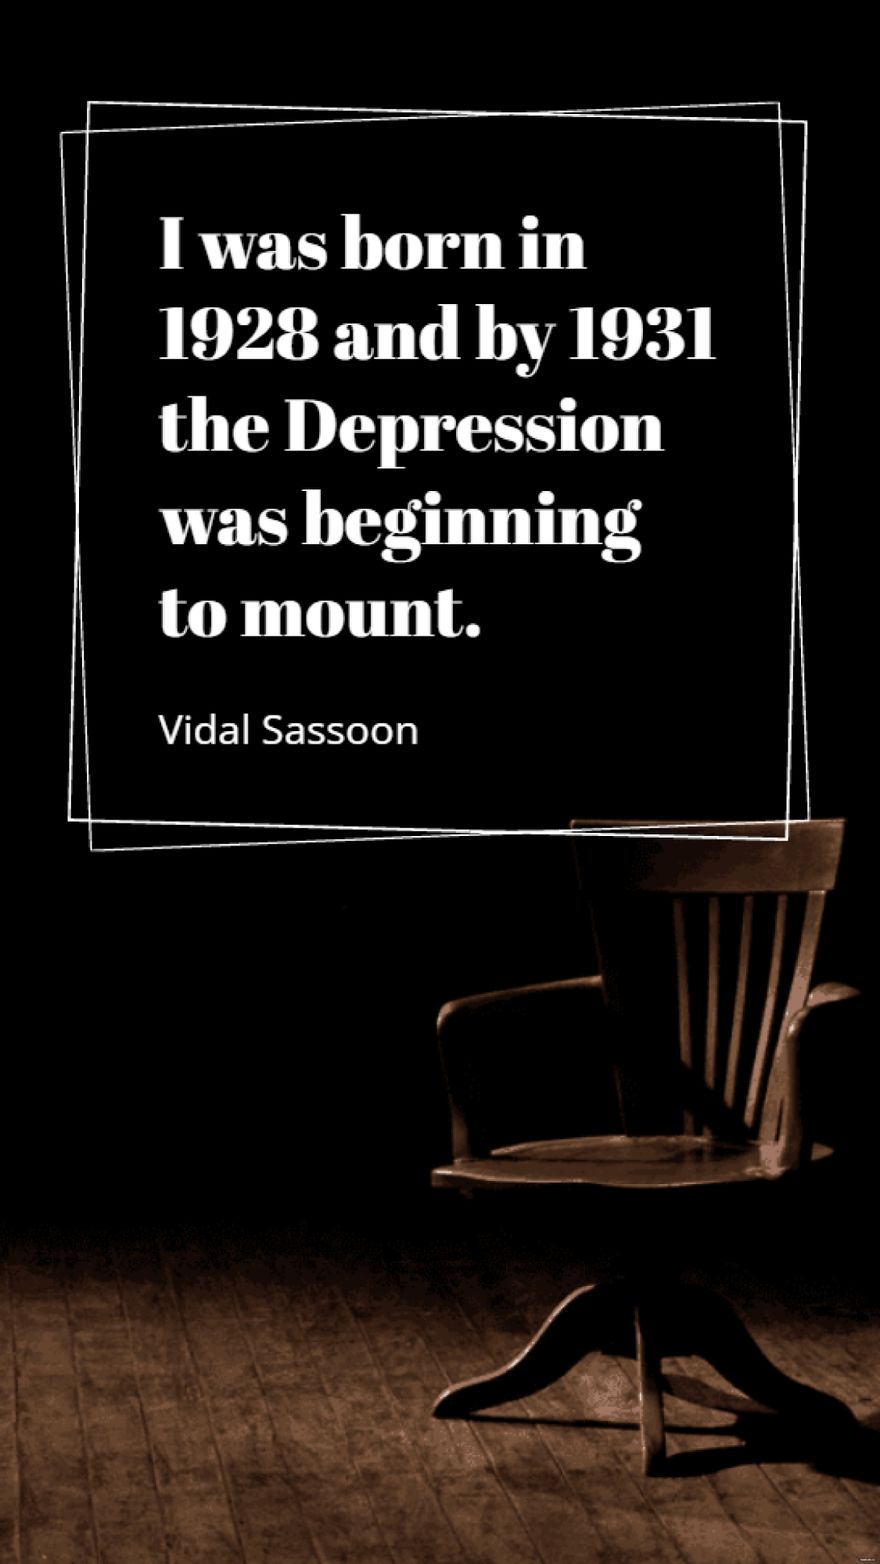 Vidal Sassoon  I was born in  and by  the Depression was beginning to mount